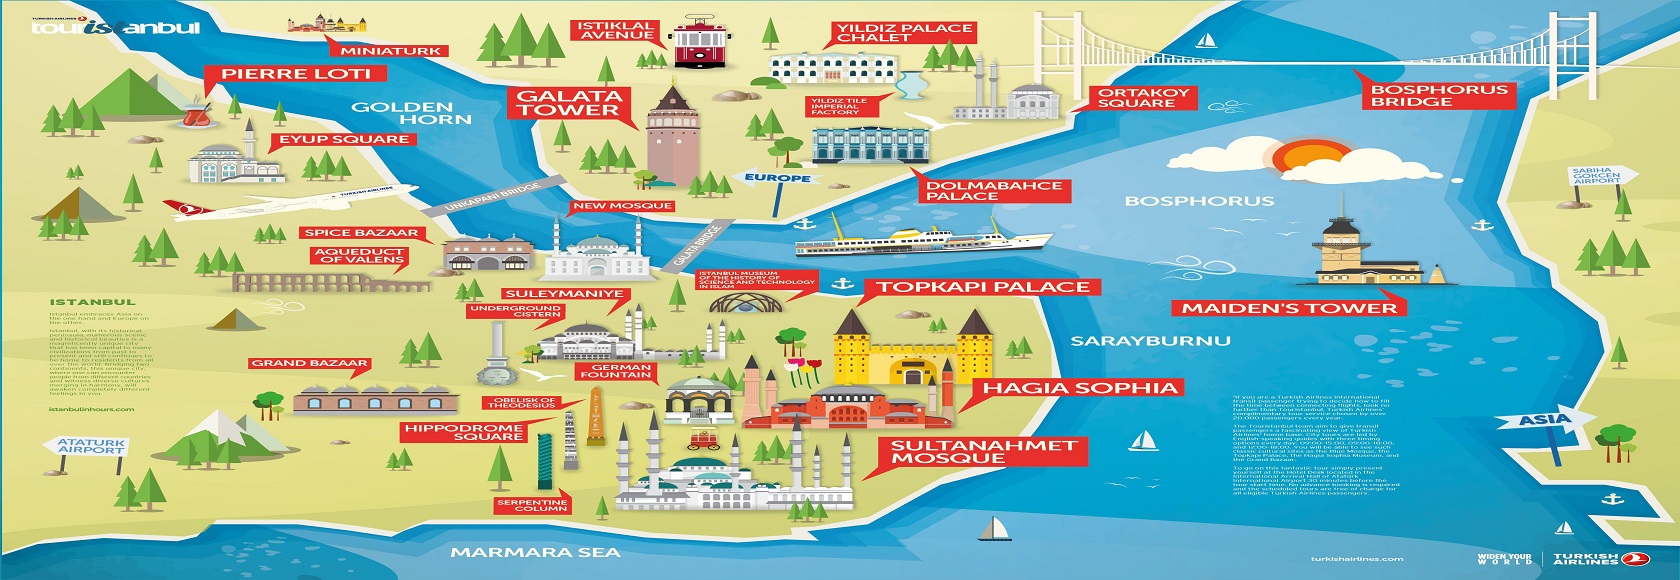 Istanbul-Tourist-Attractions-Map